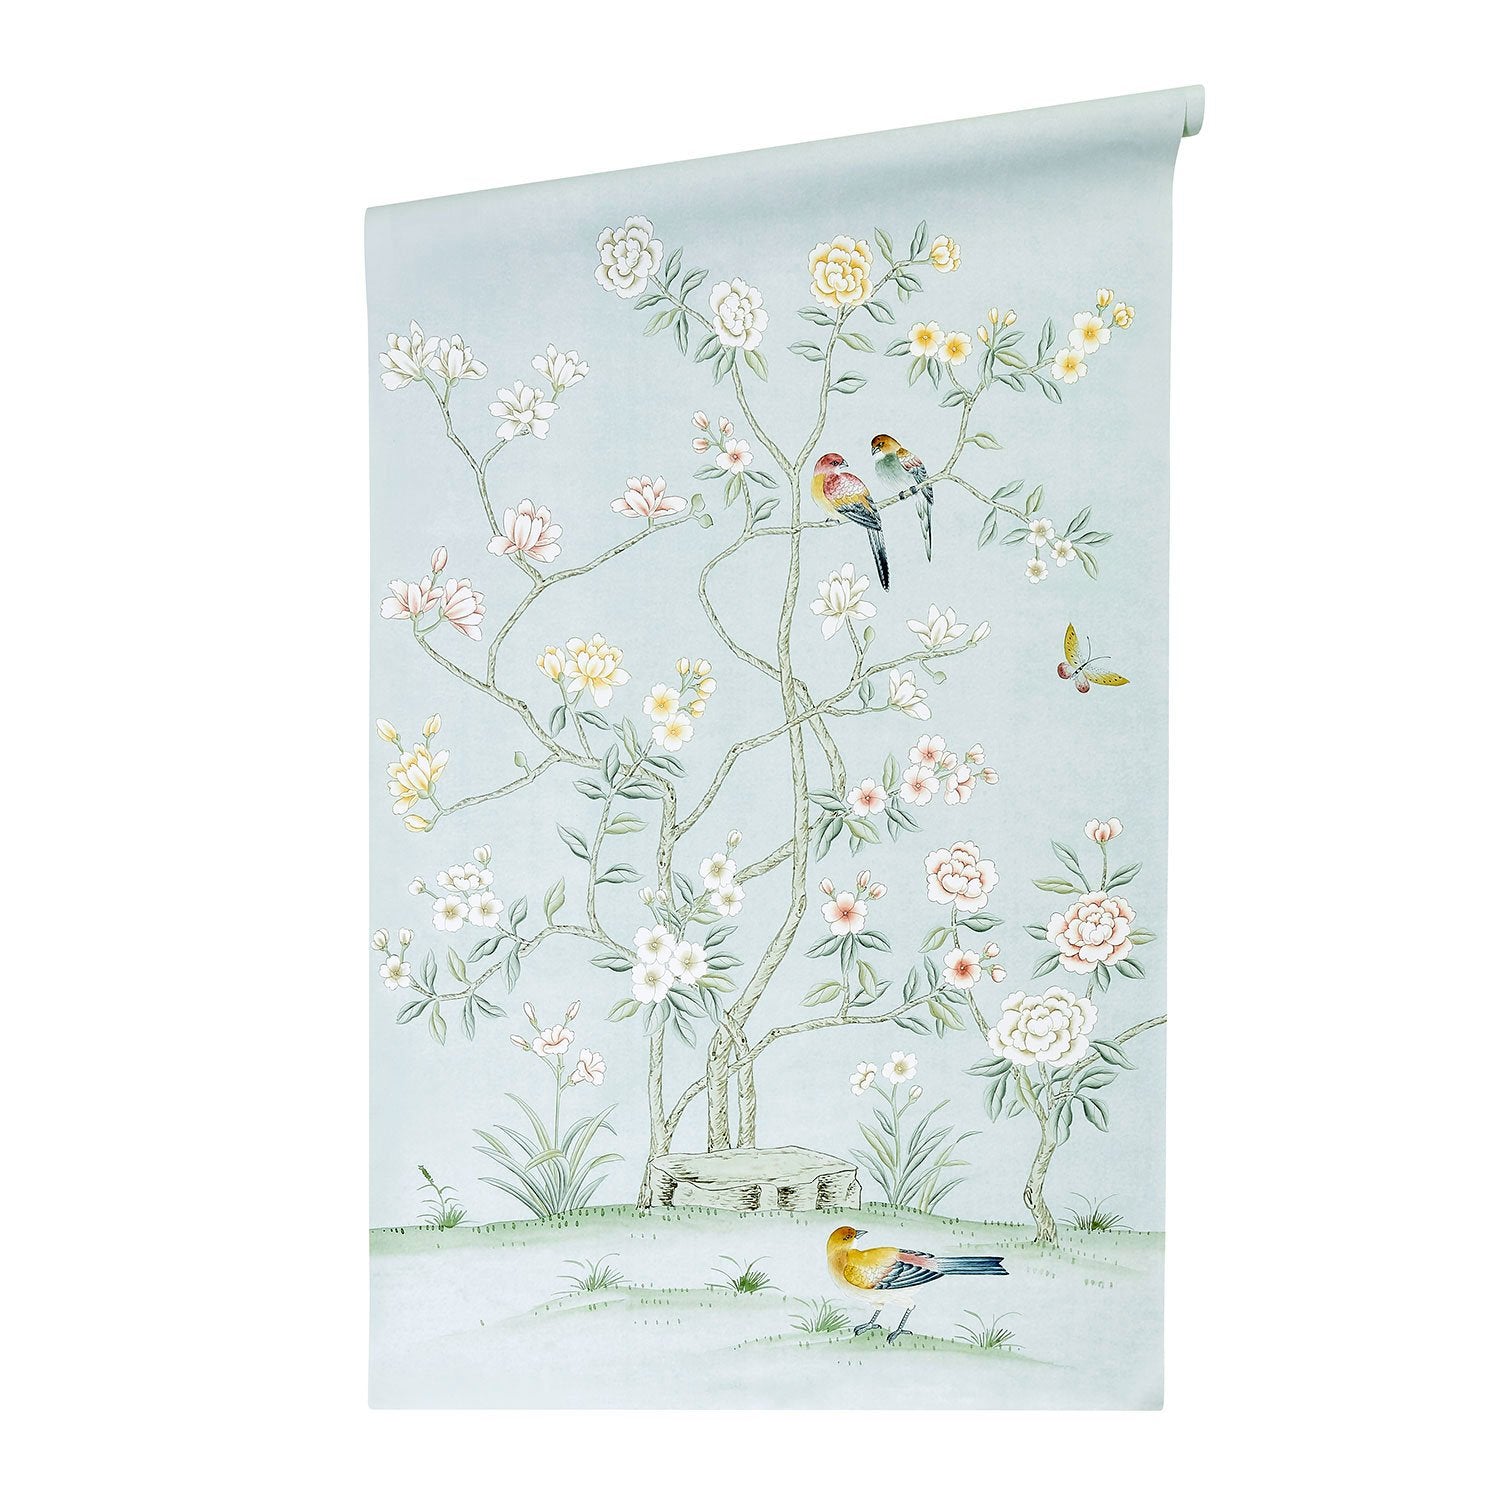 Neutral Chinoiserie Wallpaper Murals from surface View  Chinoiserie  wallpaper dining room Chinoiserie wallpaper bedroom Chinoiserie wallpaper